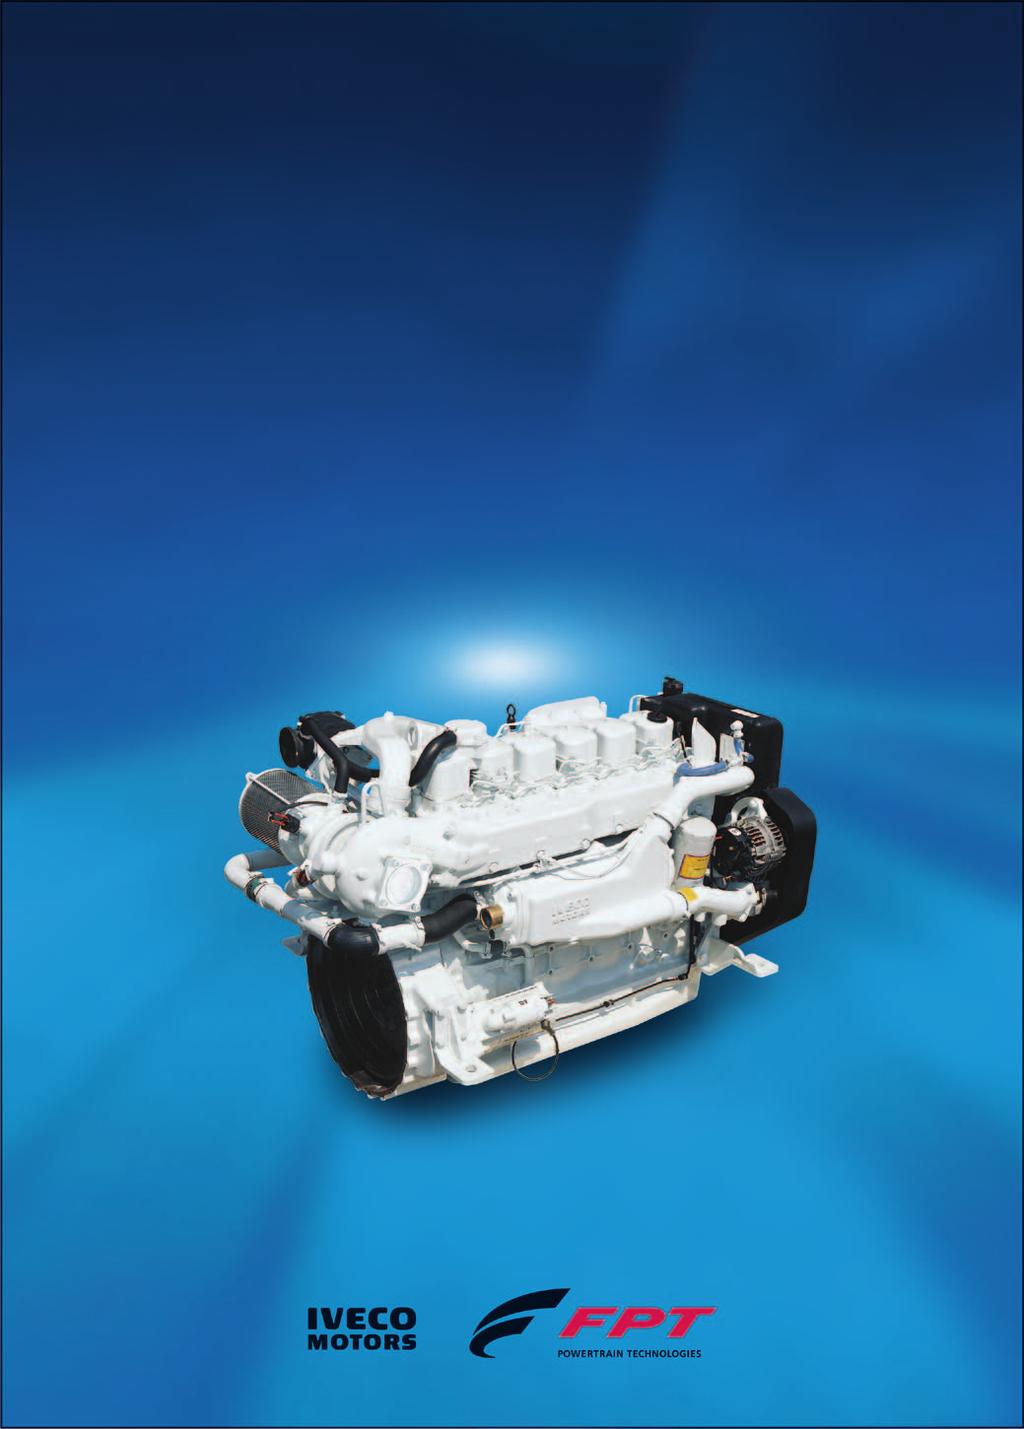 NEF 220 FOR MARINE APPLICATIONS 6 CYLINDERS IN LINE - DIESEL CYCLE 162 kw (220 CV) @ 2800 rpm (A1) 147 kw (200 CV) @ 2800